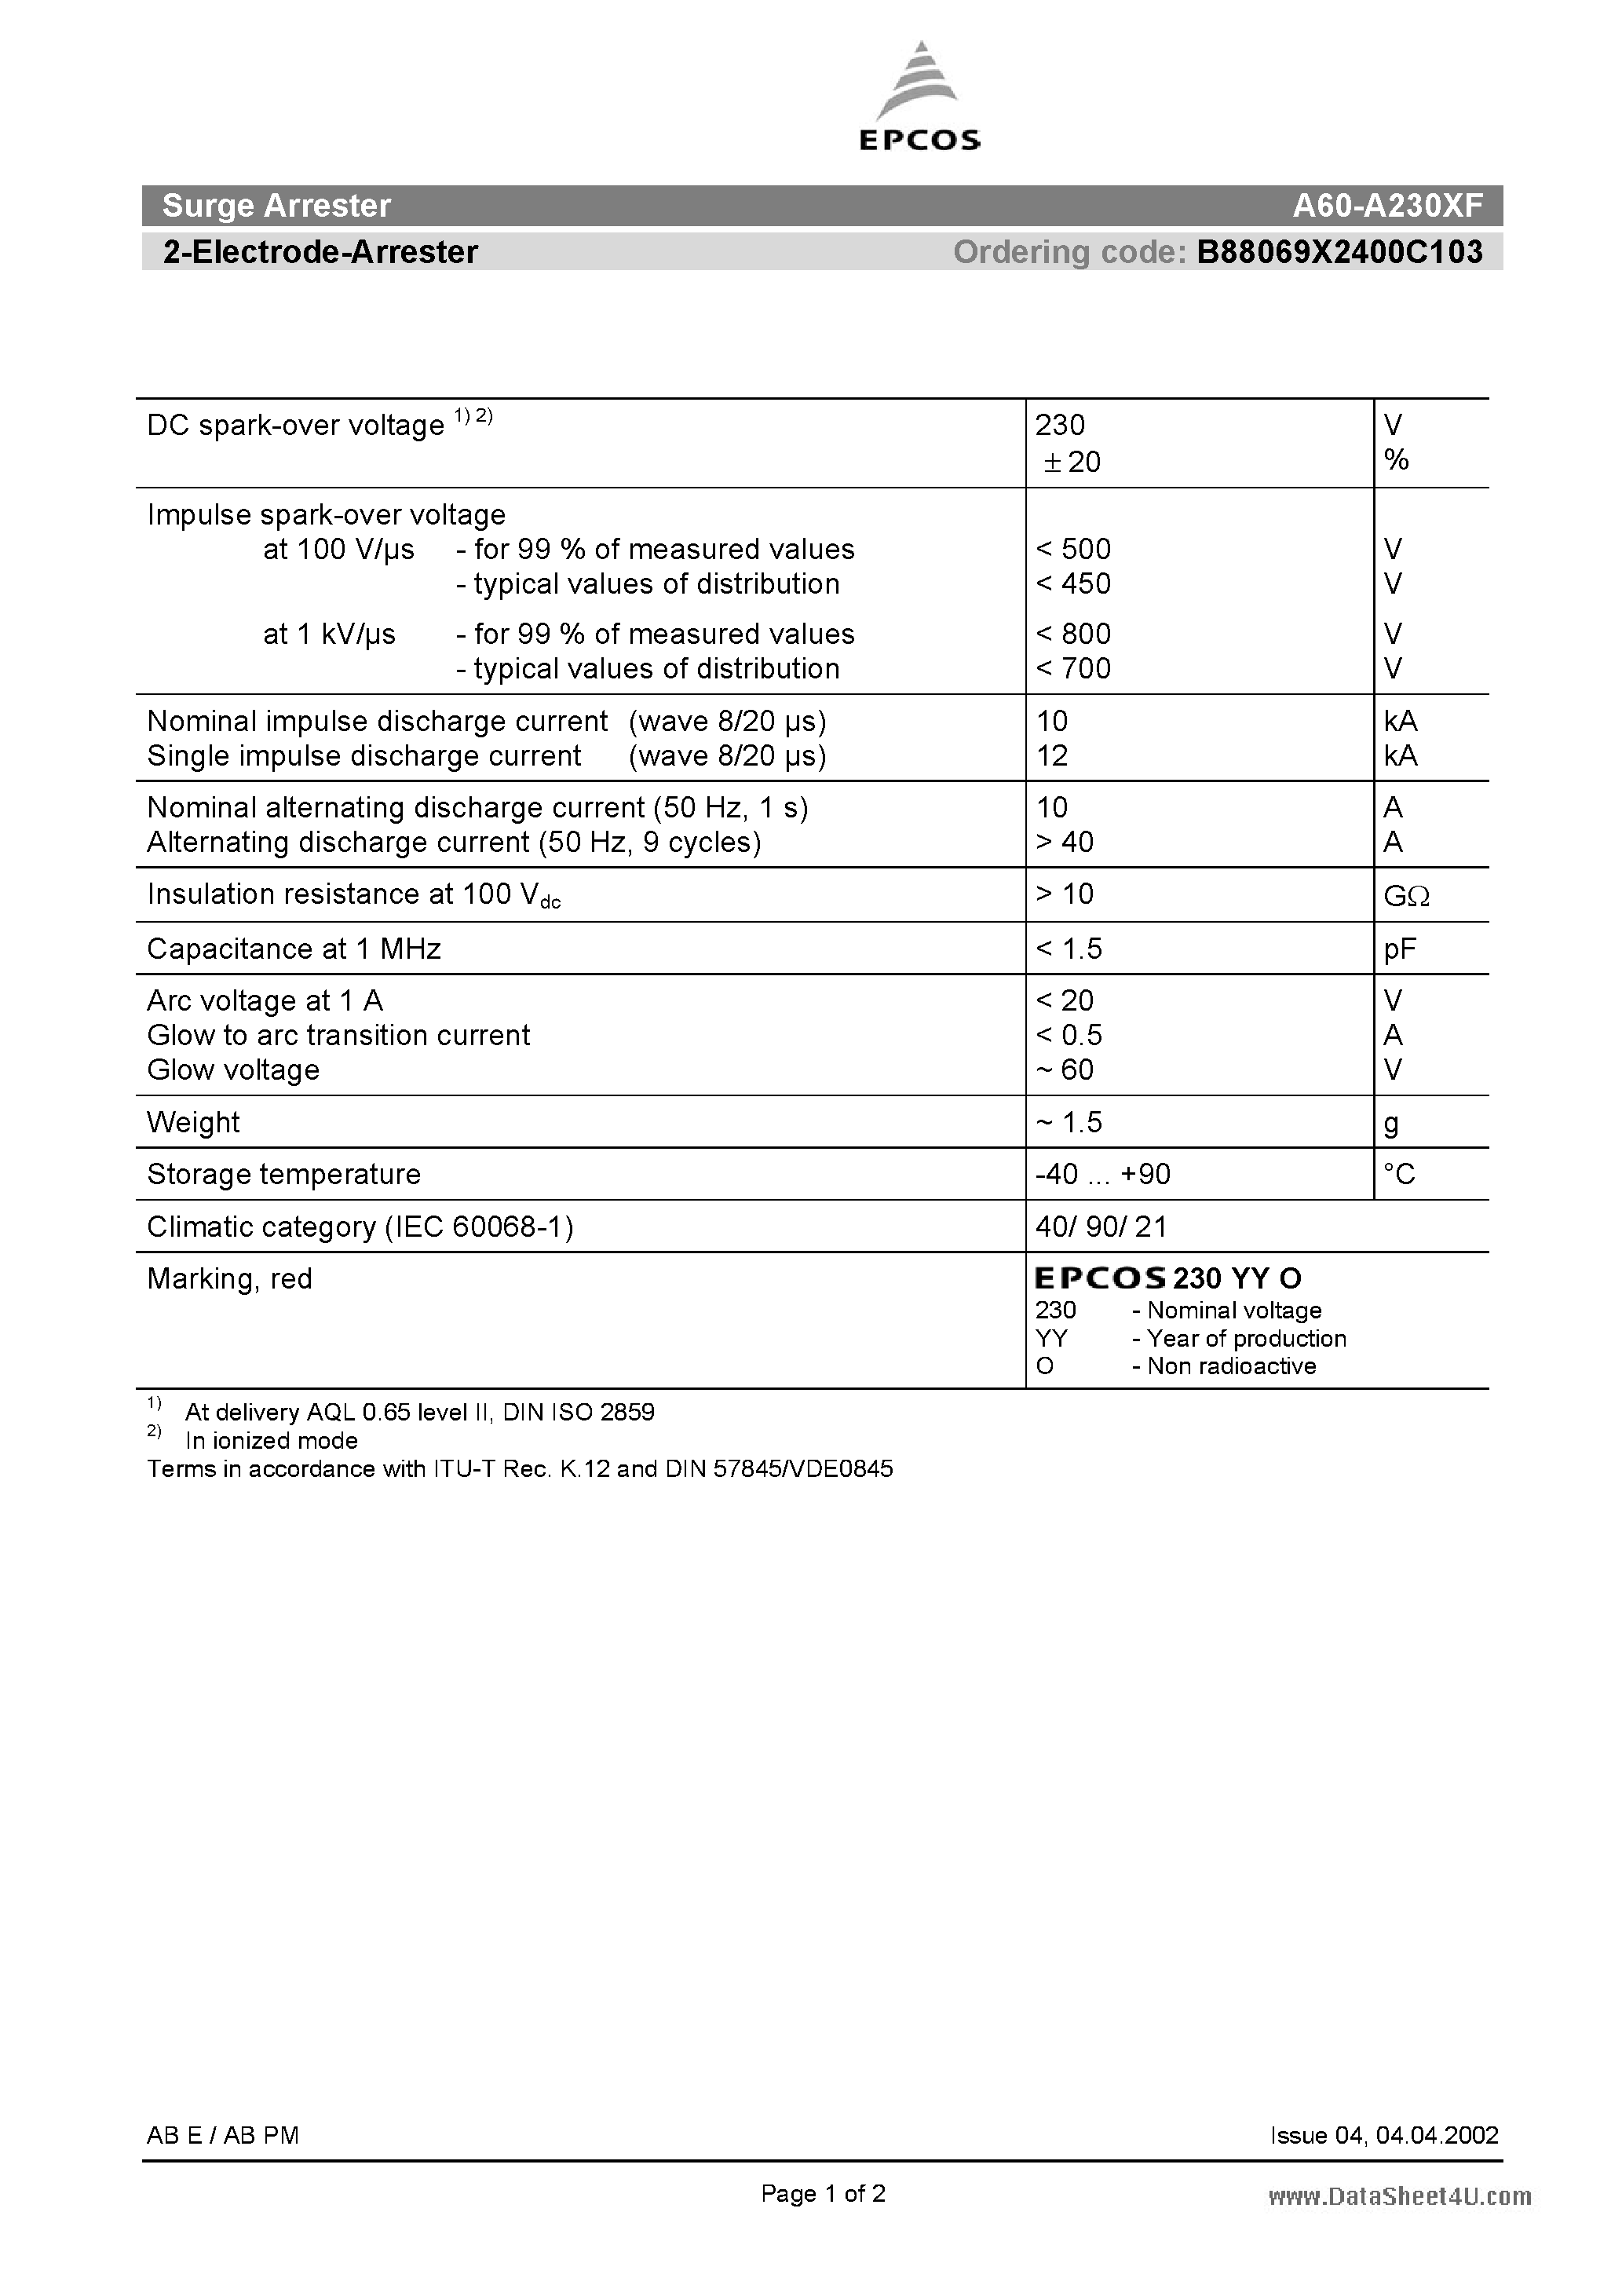 Datasheet A60-A230XF - 2-Electrode-Arrester page 1